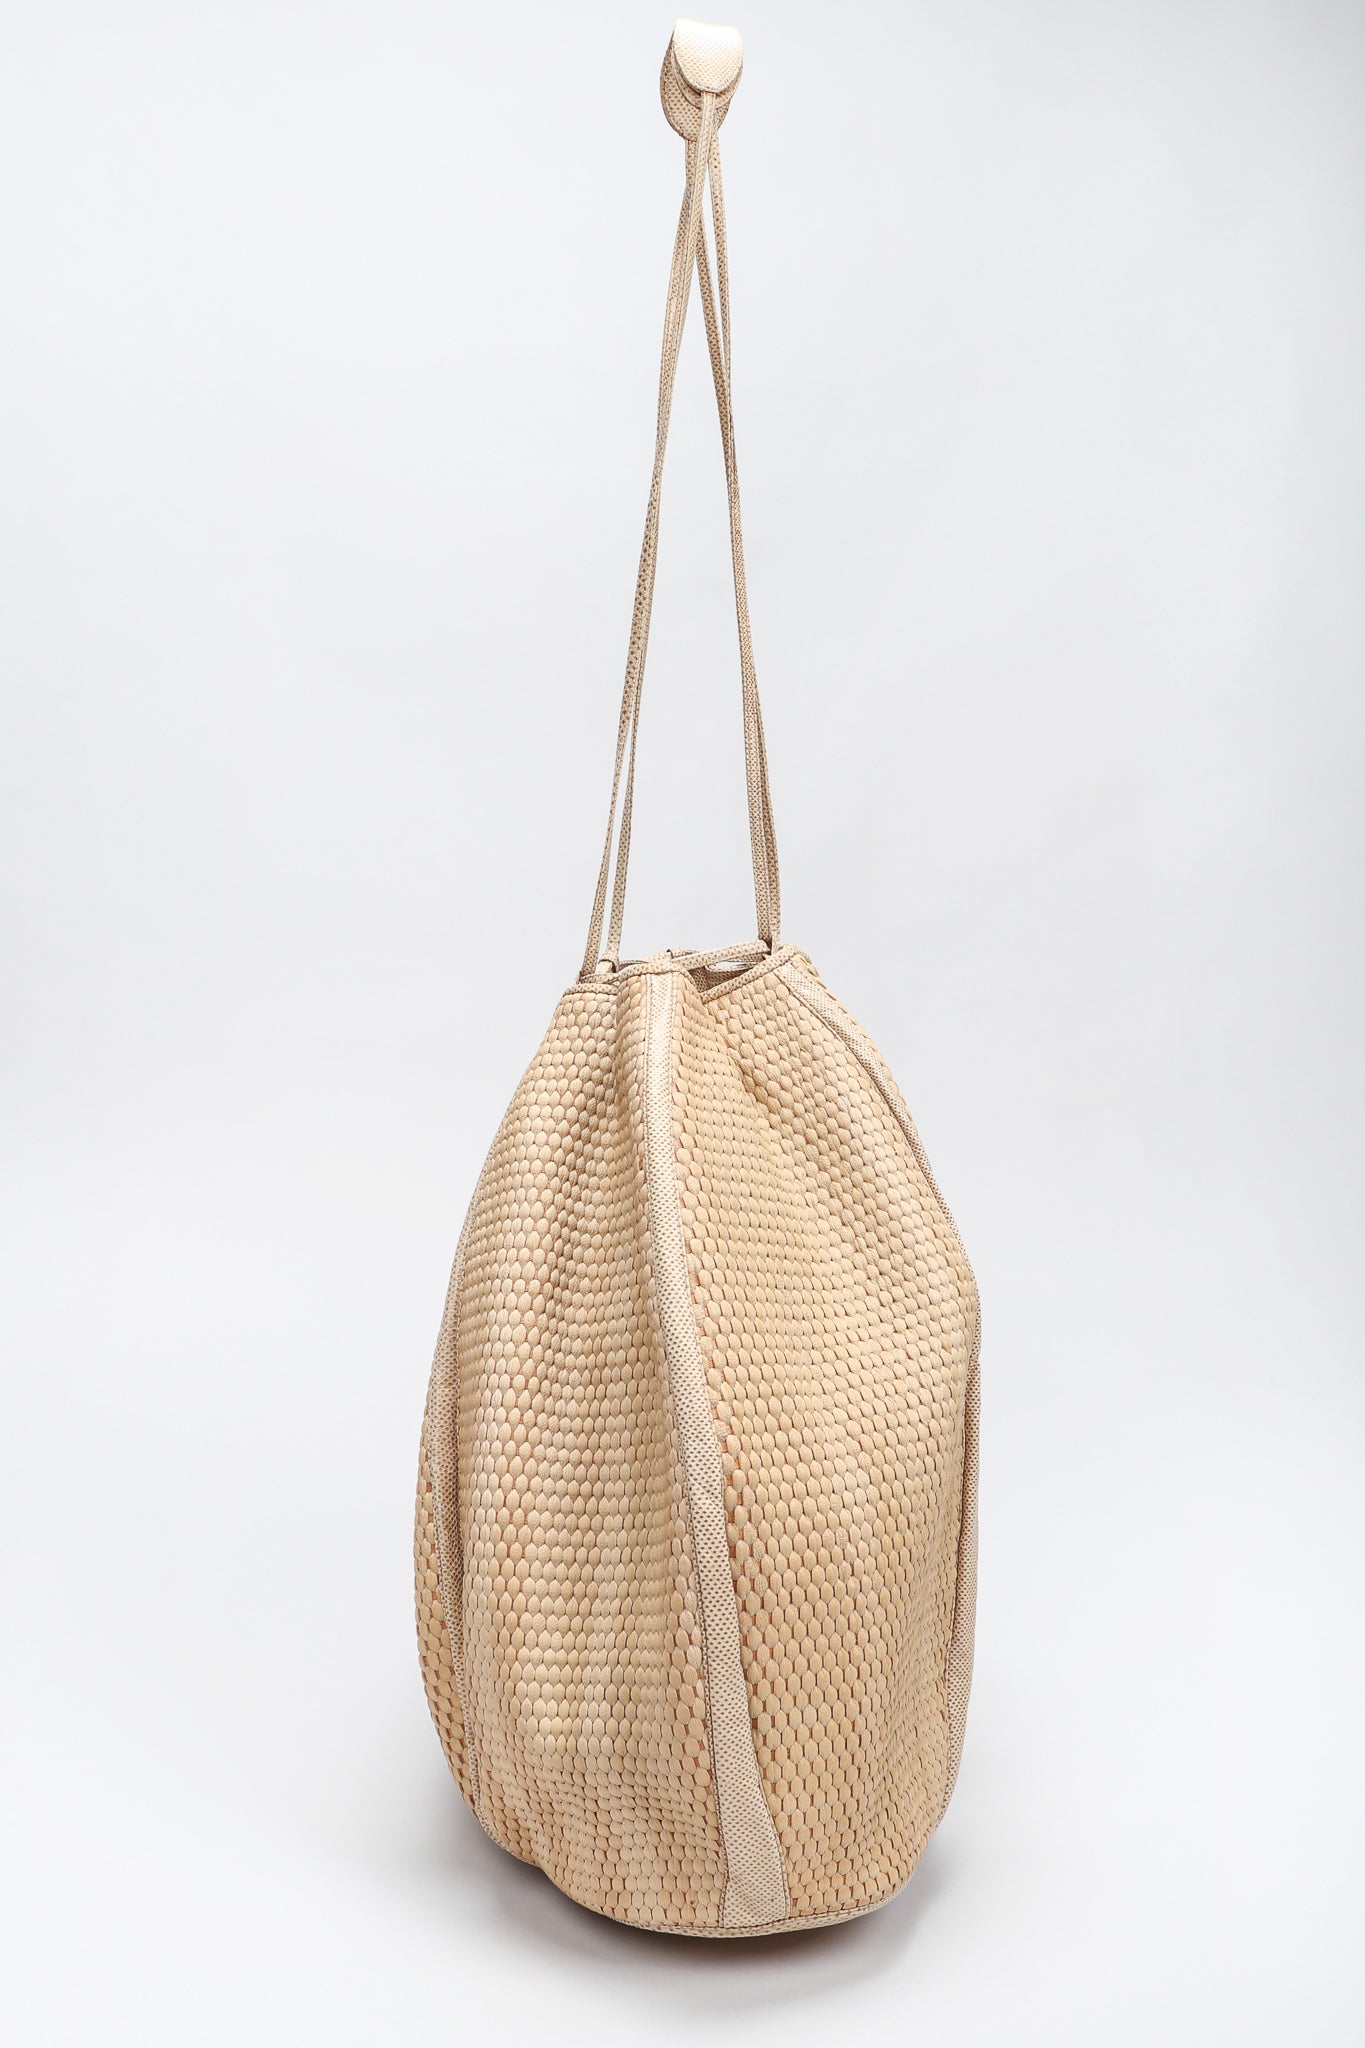 Recess Los Angeles Designer Consignment Vintage Judith Leiber Oversized Woven Lizard Straw Bucket Bag Pouch